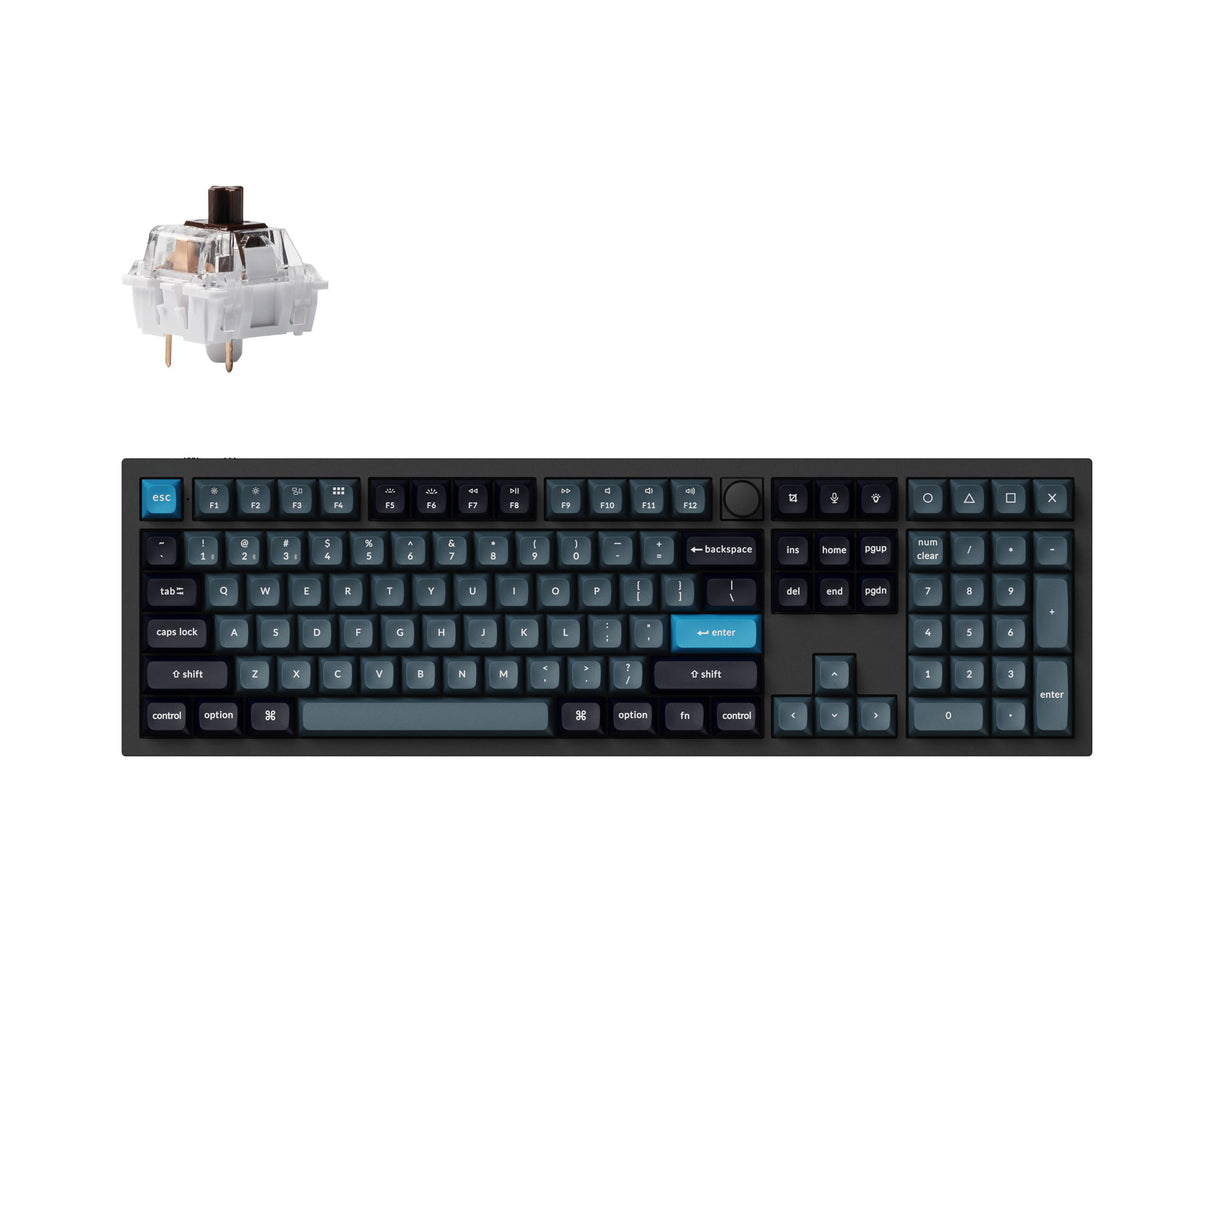 Keychron Q6 Pro QMK/VIA wireless custom mechanical keyboard 100 percent layout full aluminum black frame for Mac WIndows Linux with RGB backlight and hot-swappable K Pro brown